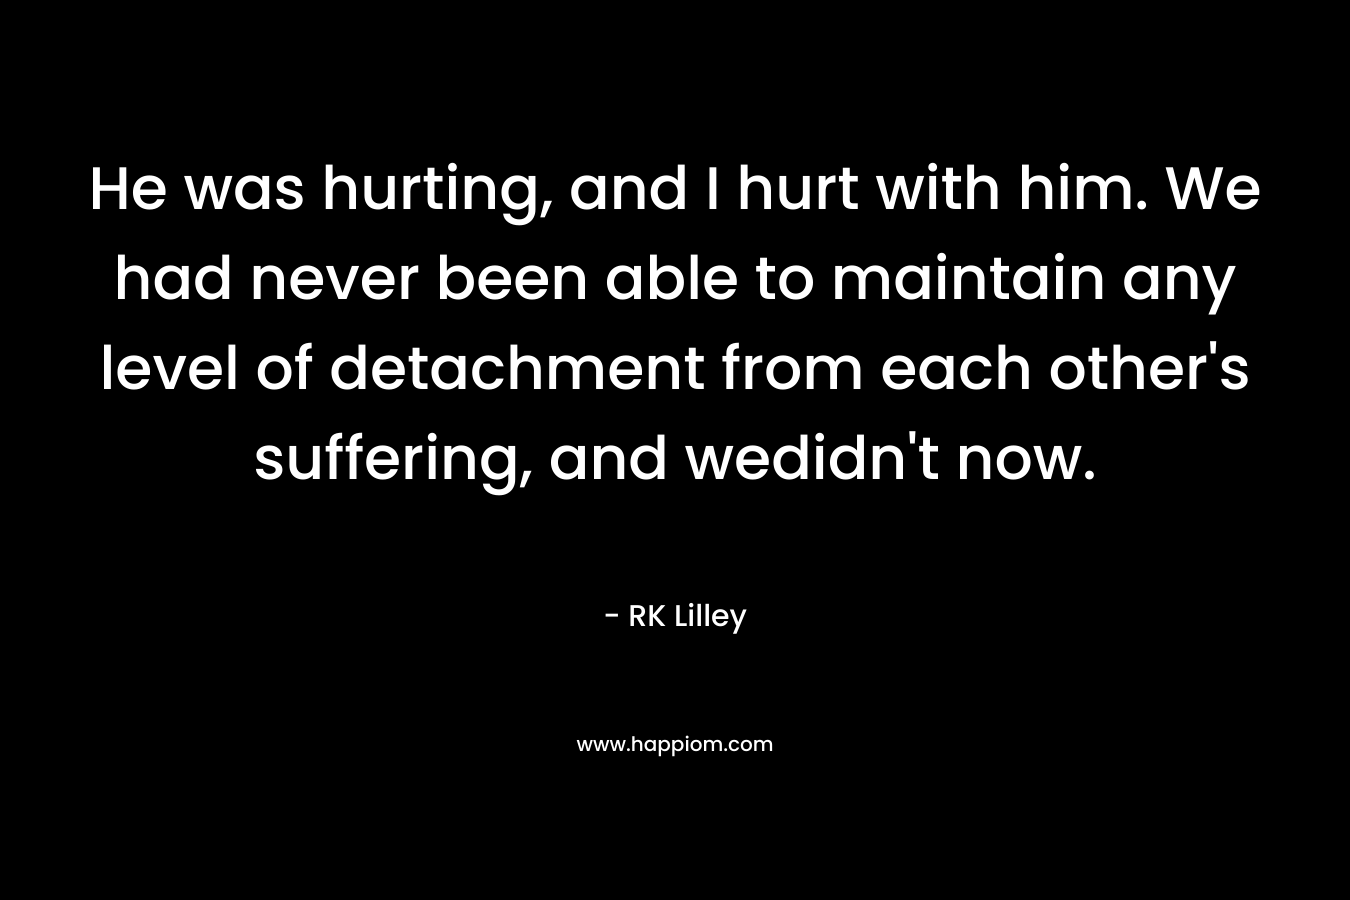 He was hurting, and I hurt with him. We had never been able to maintain any level of detachment from each other’s suffering, and wedidn’t now. – RK Lilley